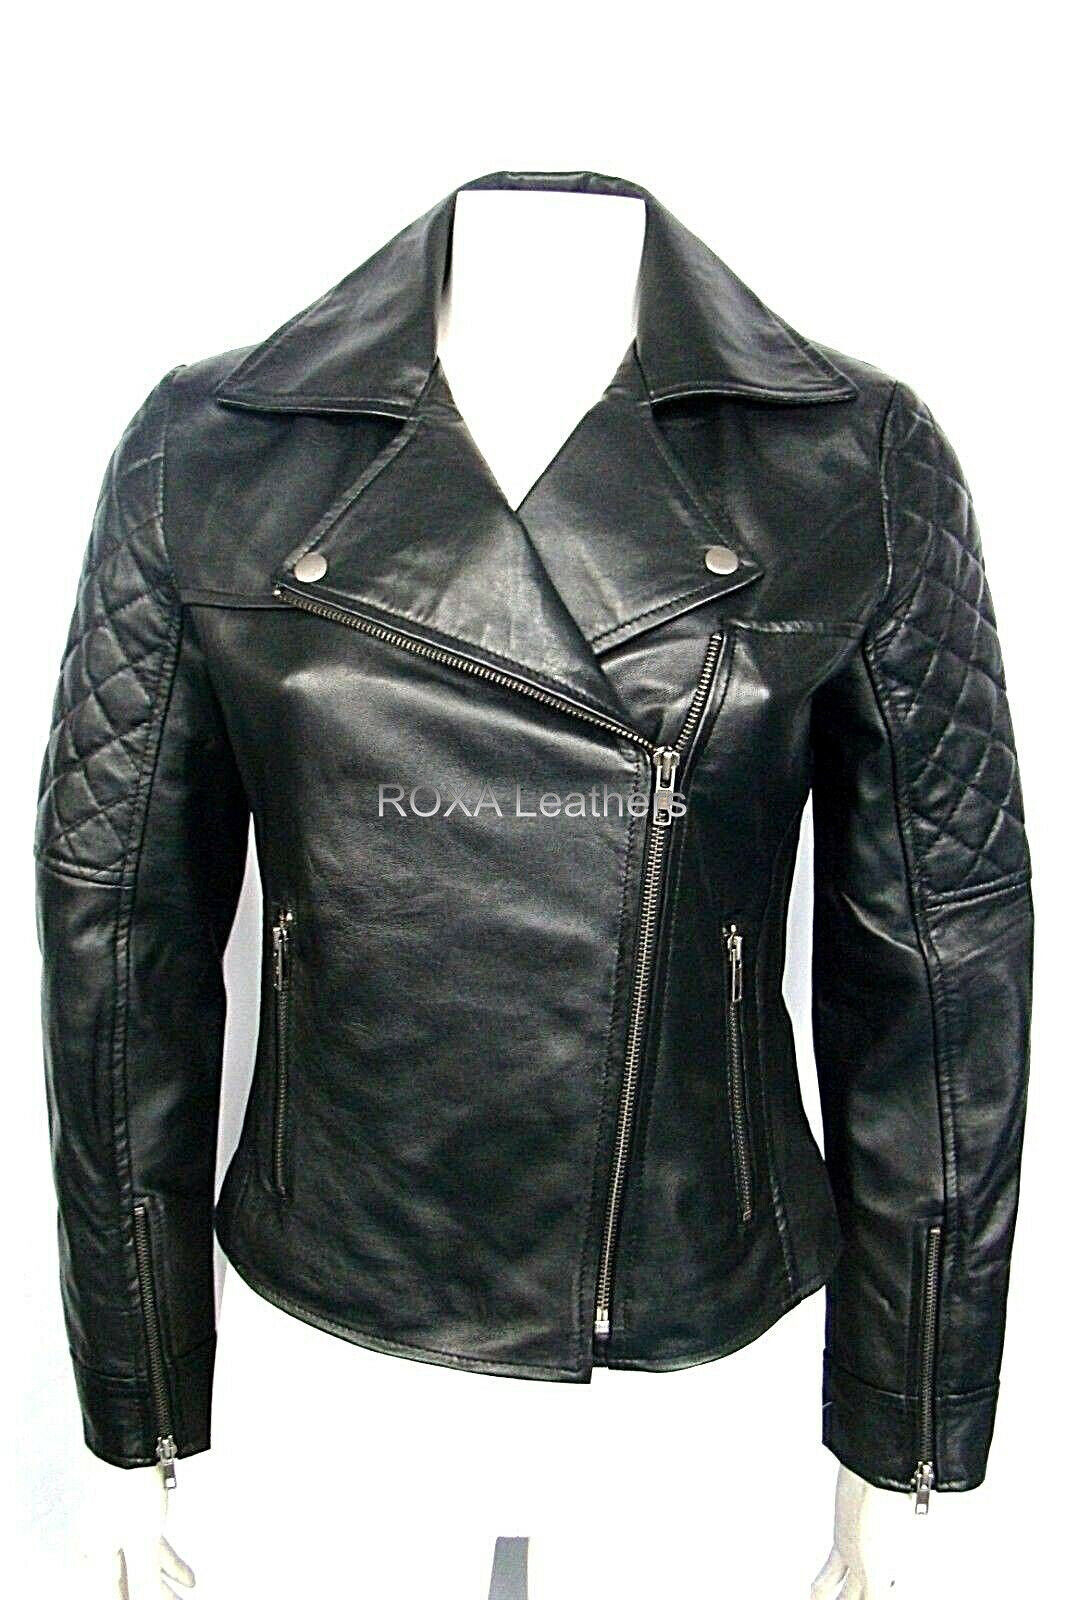 Women's Asymmetrical Quilted Black Motorcycle Leather Jacket